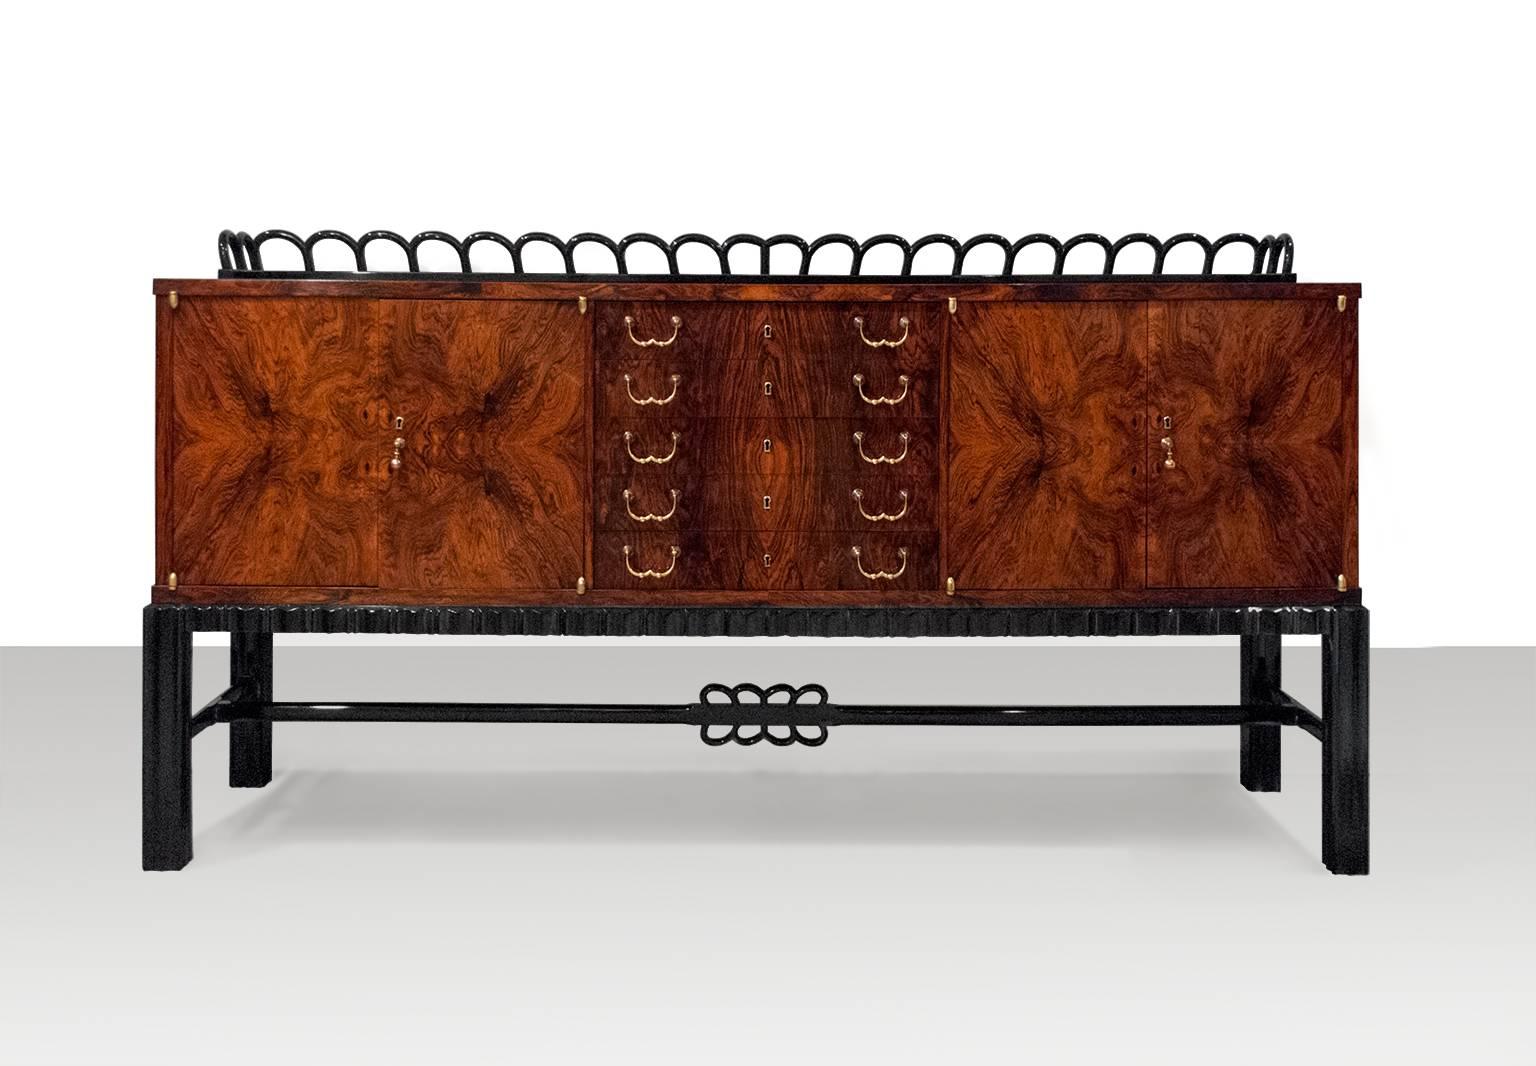 Beautiful Art Deco rosewood sideboard cabinet by Jindrich Halabala produced while head of UP (United Woodcrafts Manufacturers company) in Brno. The cabinet has book matched rosewood veneer on its drawers, doors, top and sides. Drawer and door pulls